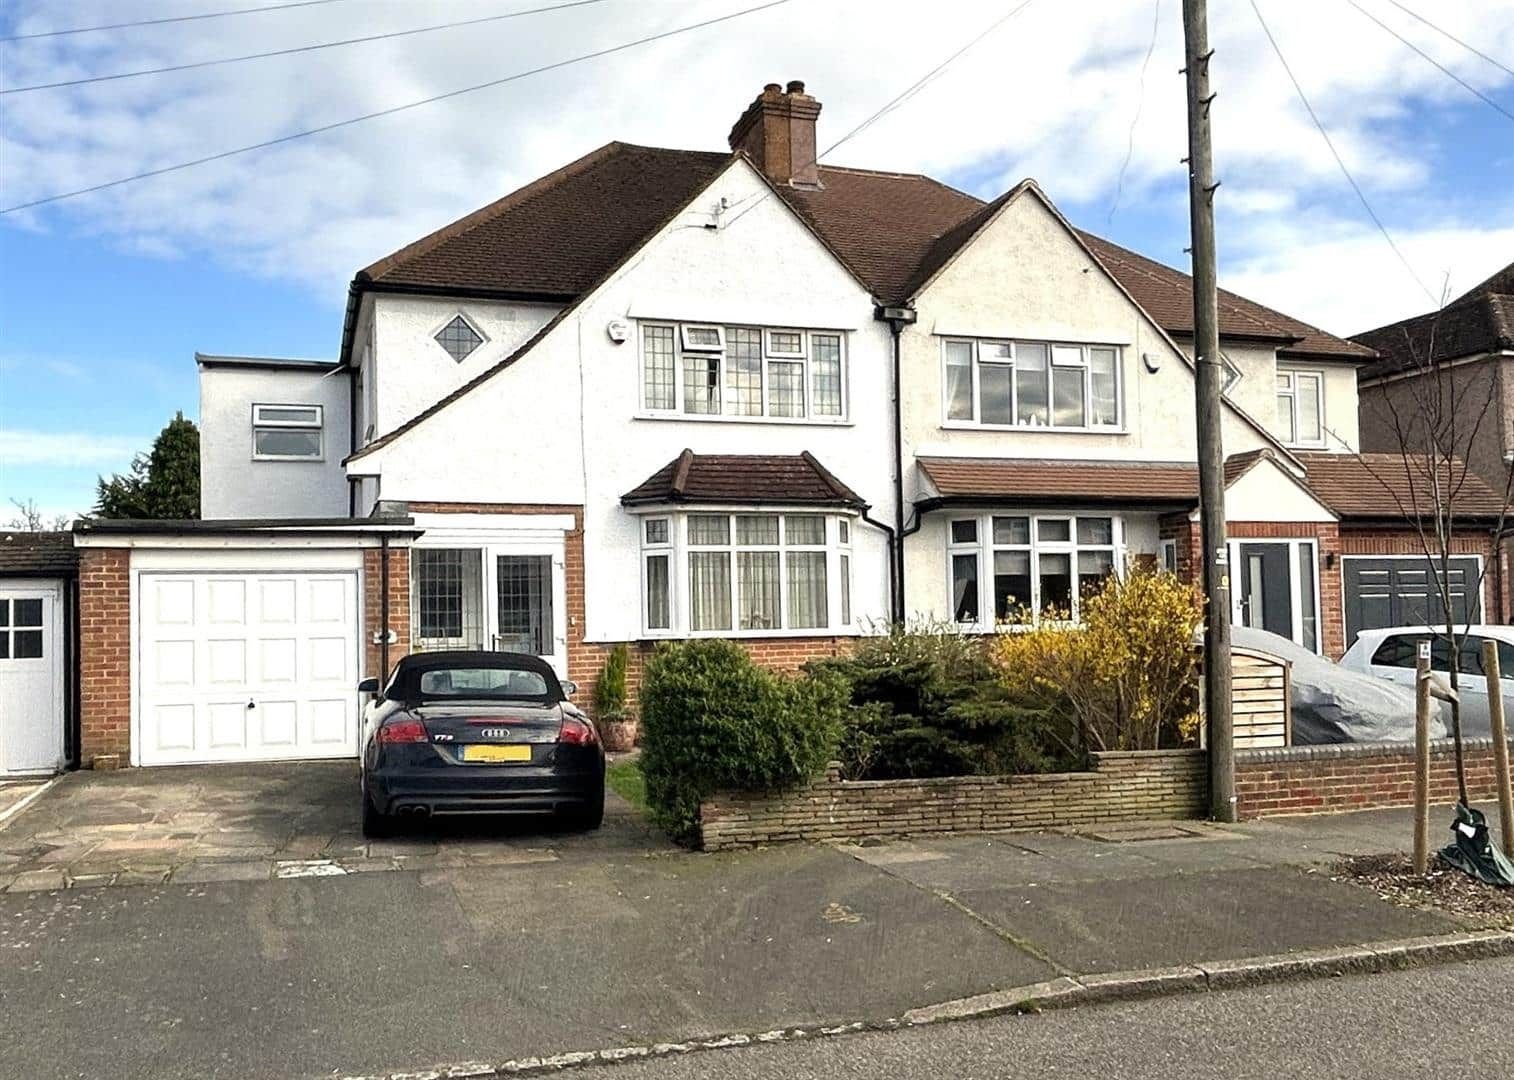 Dartmouth Road, Bromley, Kent, BR2 7NF